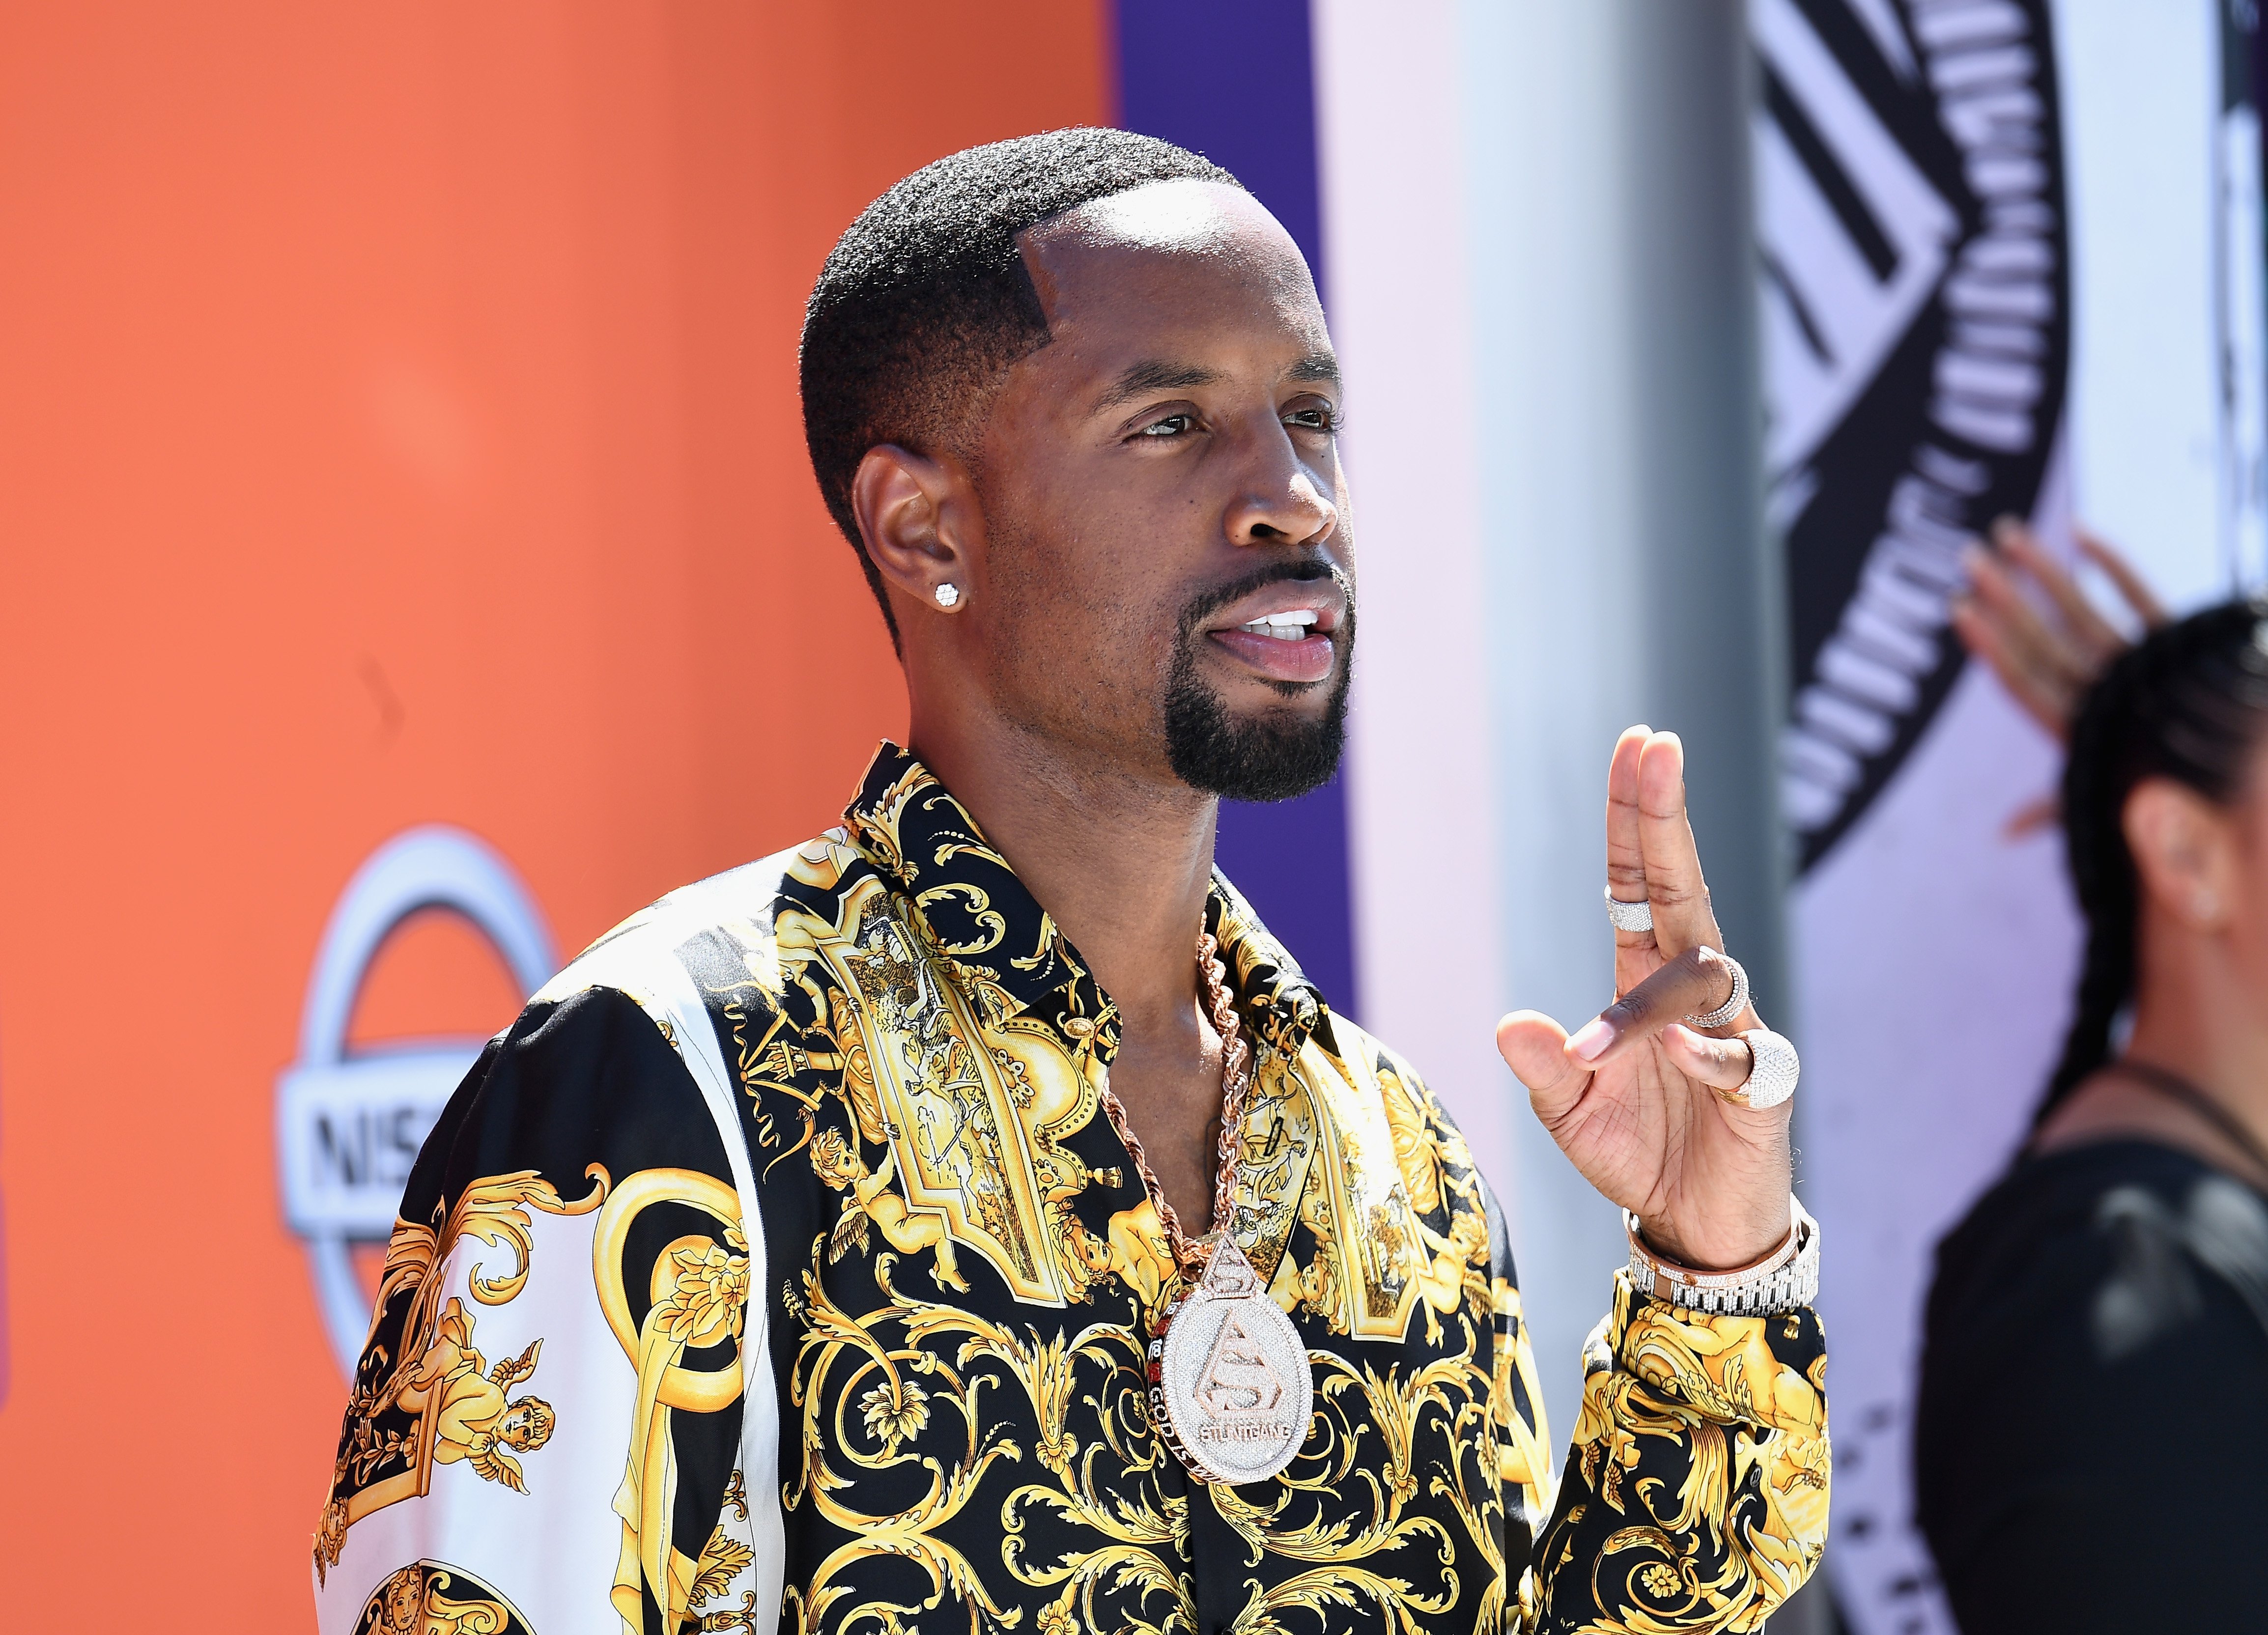 Safaree at the 2018 BET Awards in Los Angeles, California on June 24, 2018. | Photo: Getty Images